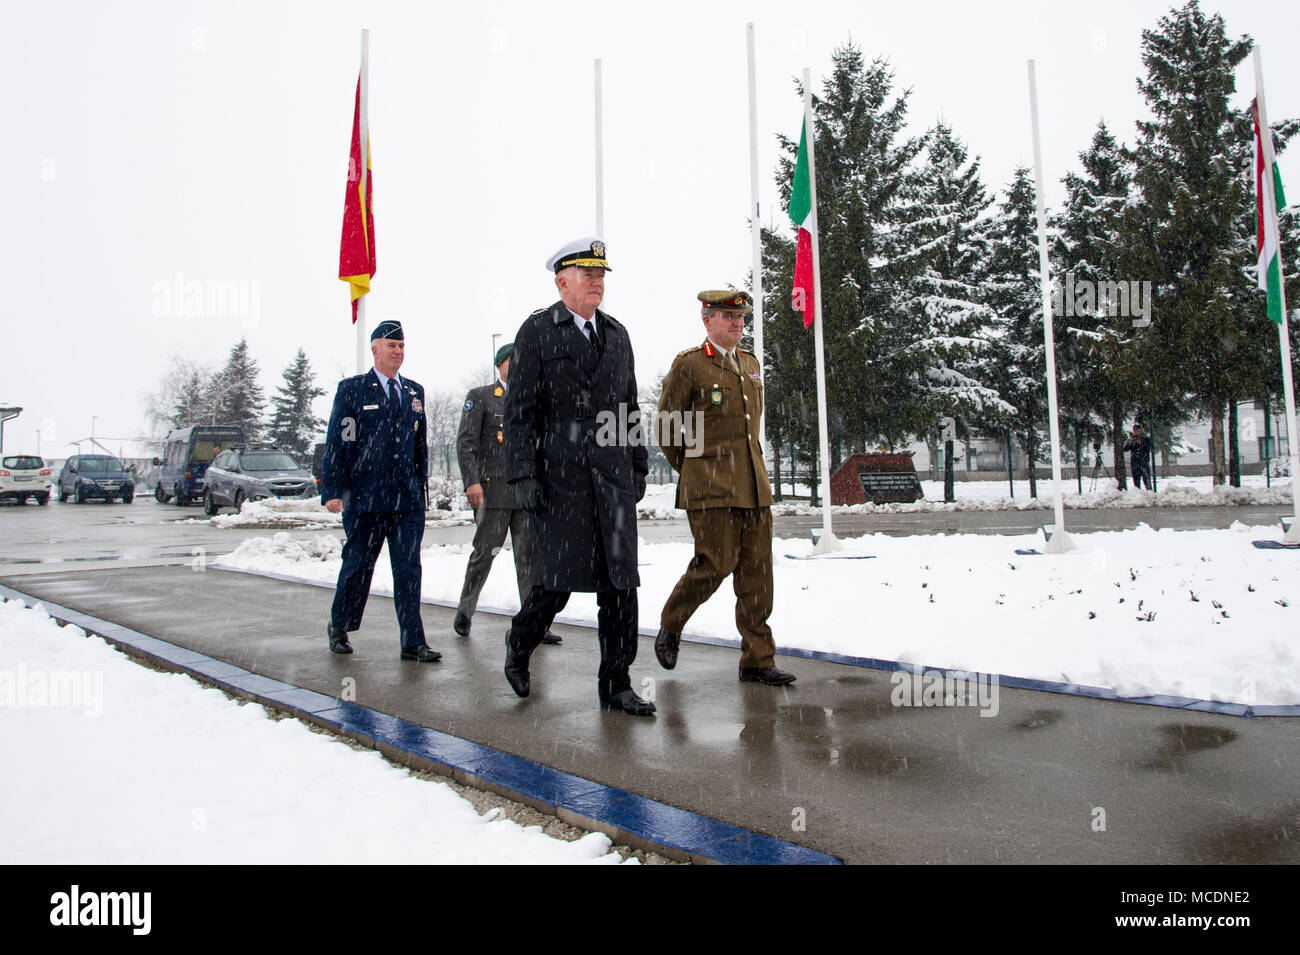 U.S. Navy Admiral James Foggo, U.K. Army General Sir James Everard, Austrian Army Maj. Gen. Anton Waldner, and U.S. Air Force Brig. Gen. Robert Huston march to inspect European soldiers during a welcome ceremony, Feb. 21, 2018 to the NATO and EUFOR Headquarters, Camp Butmir, Sarajevo. Foggo serves as Allied Joint Force Command Naples commander, Everard serves as NATO's Deputy Supreme Allied Commander Europe, Waldner serves as the European Union Force Althea commander, and Huston serves as the NATO Headquarters Sarajevo commander. (U.S. Air Force photo by Staff Sgt. Amber Sorsek) Stock Photo